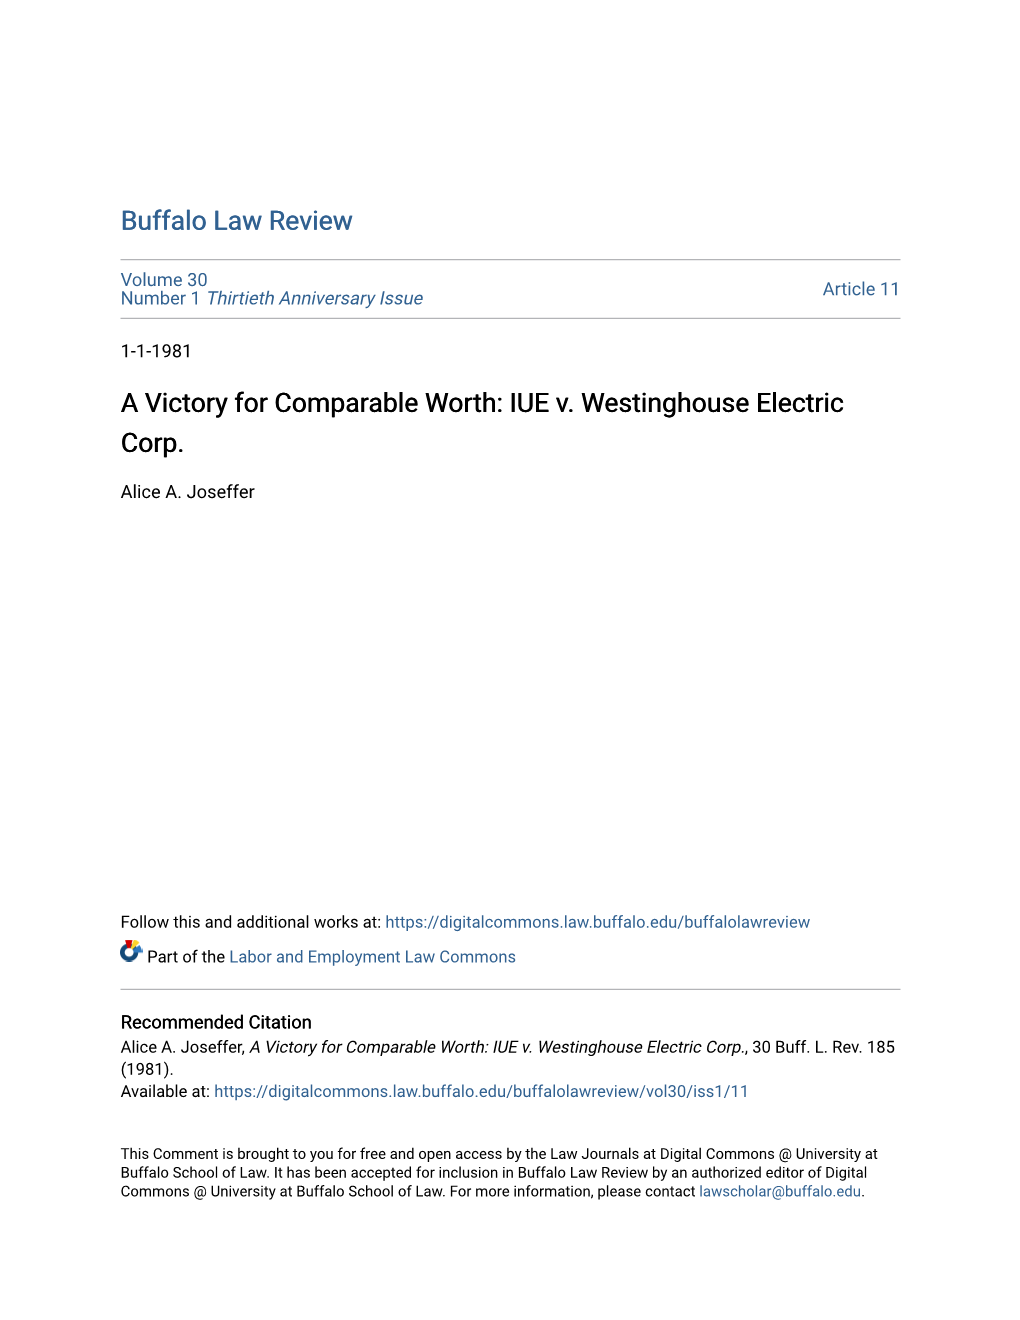 A Victory for Comparable Worth: IUE V. Westinghouse Electric Corp